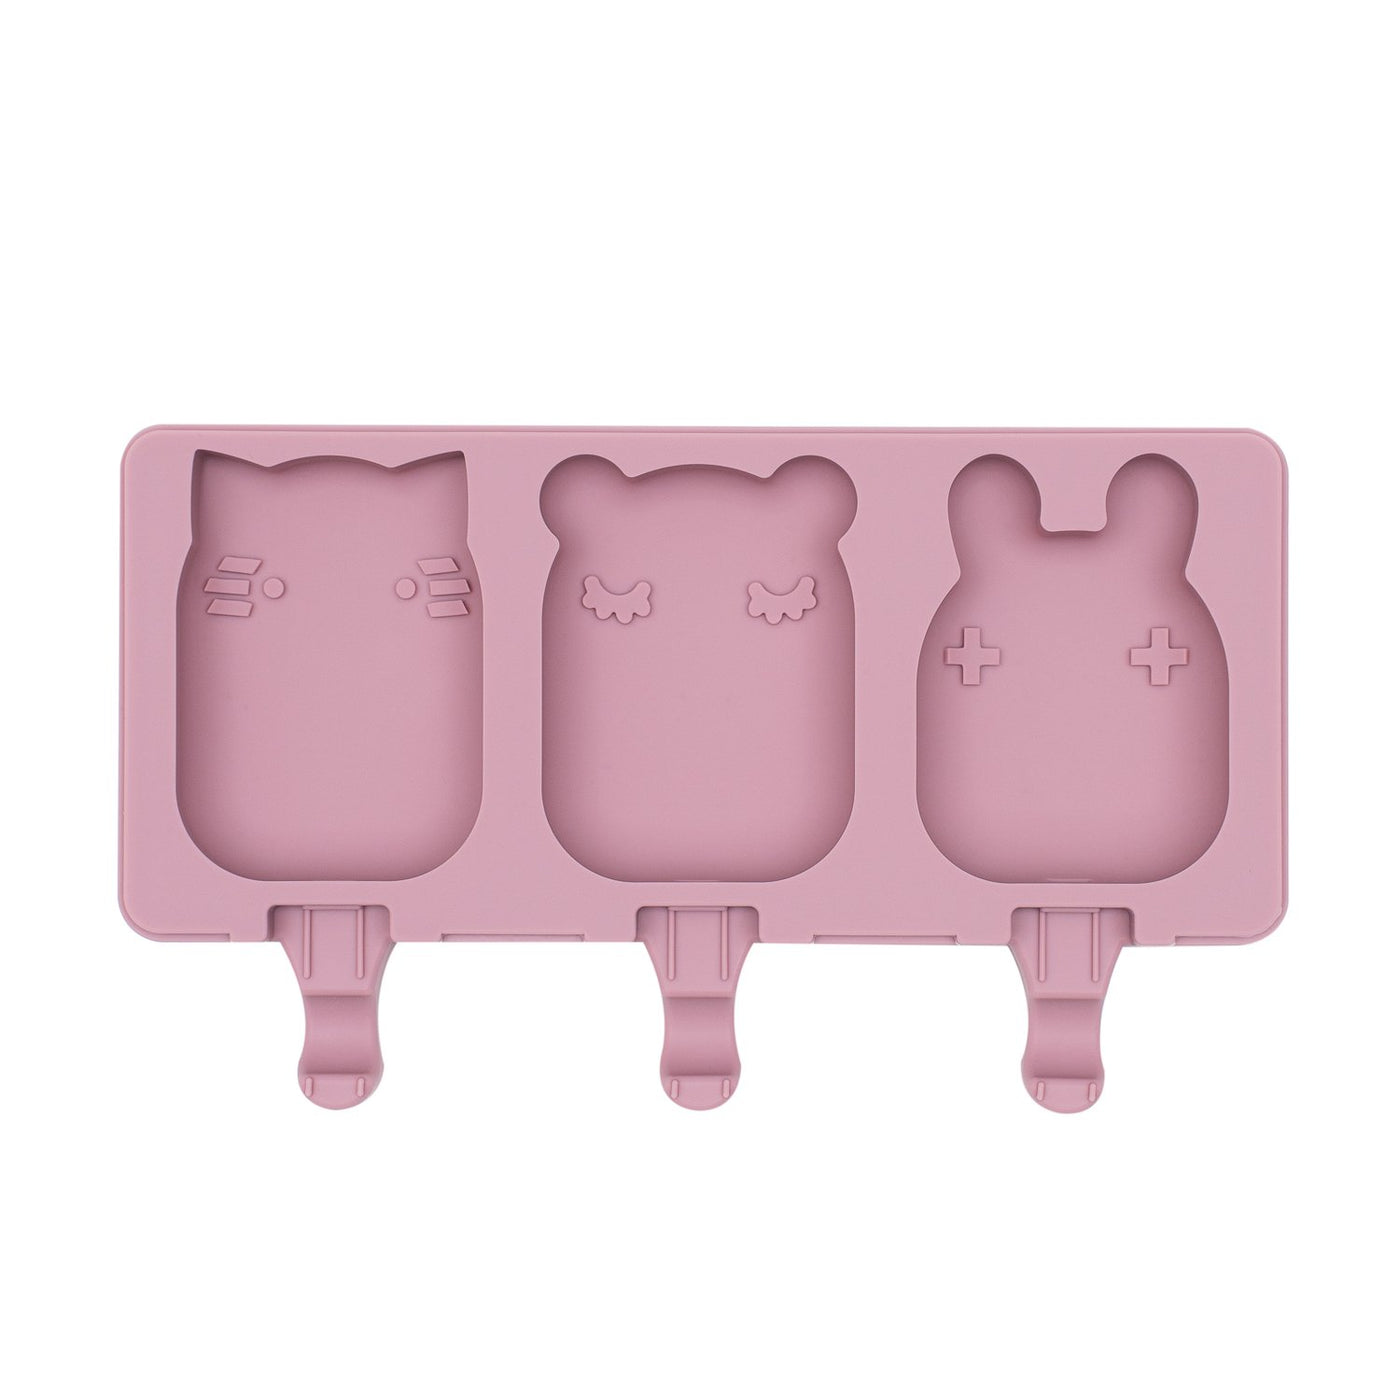 Icy Pole Mould - Dusty Pink